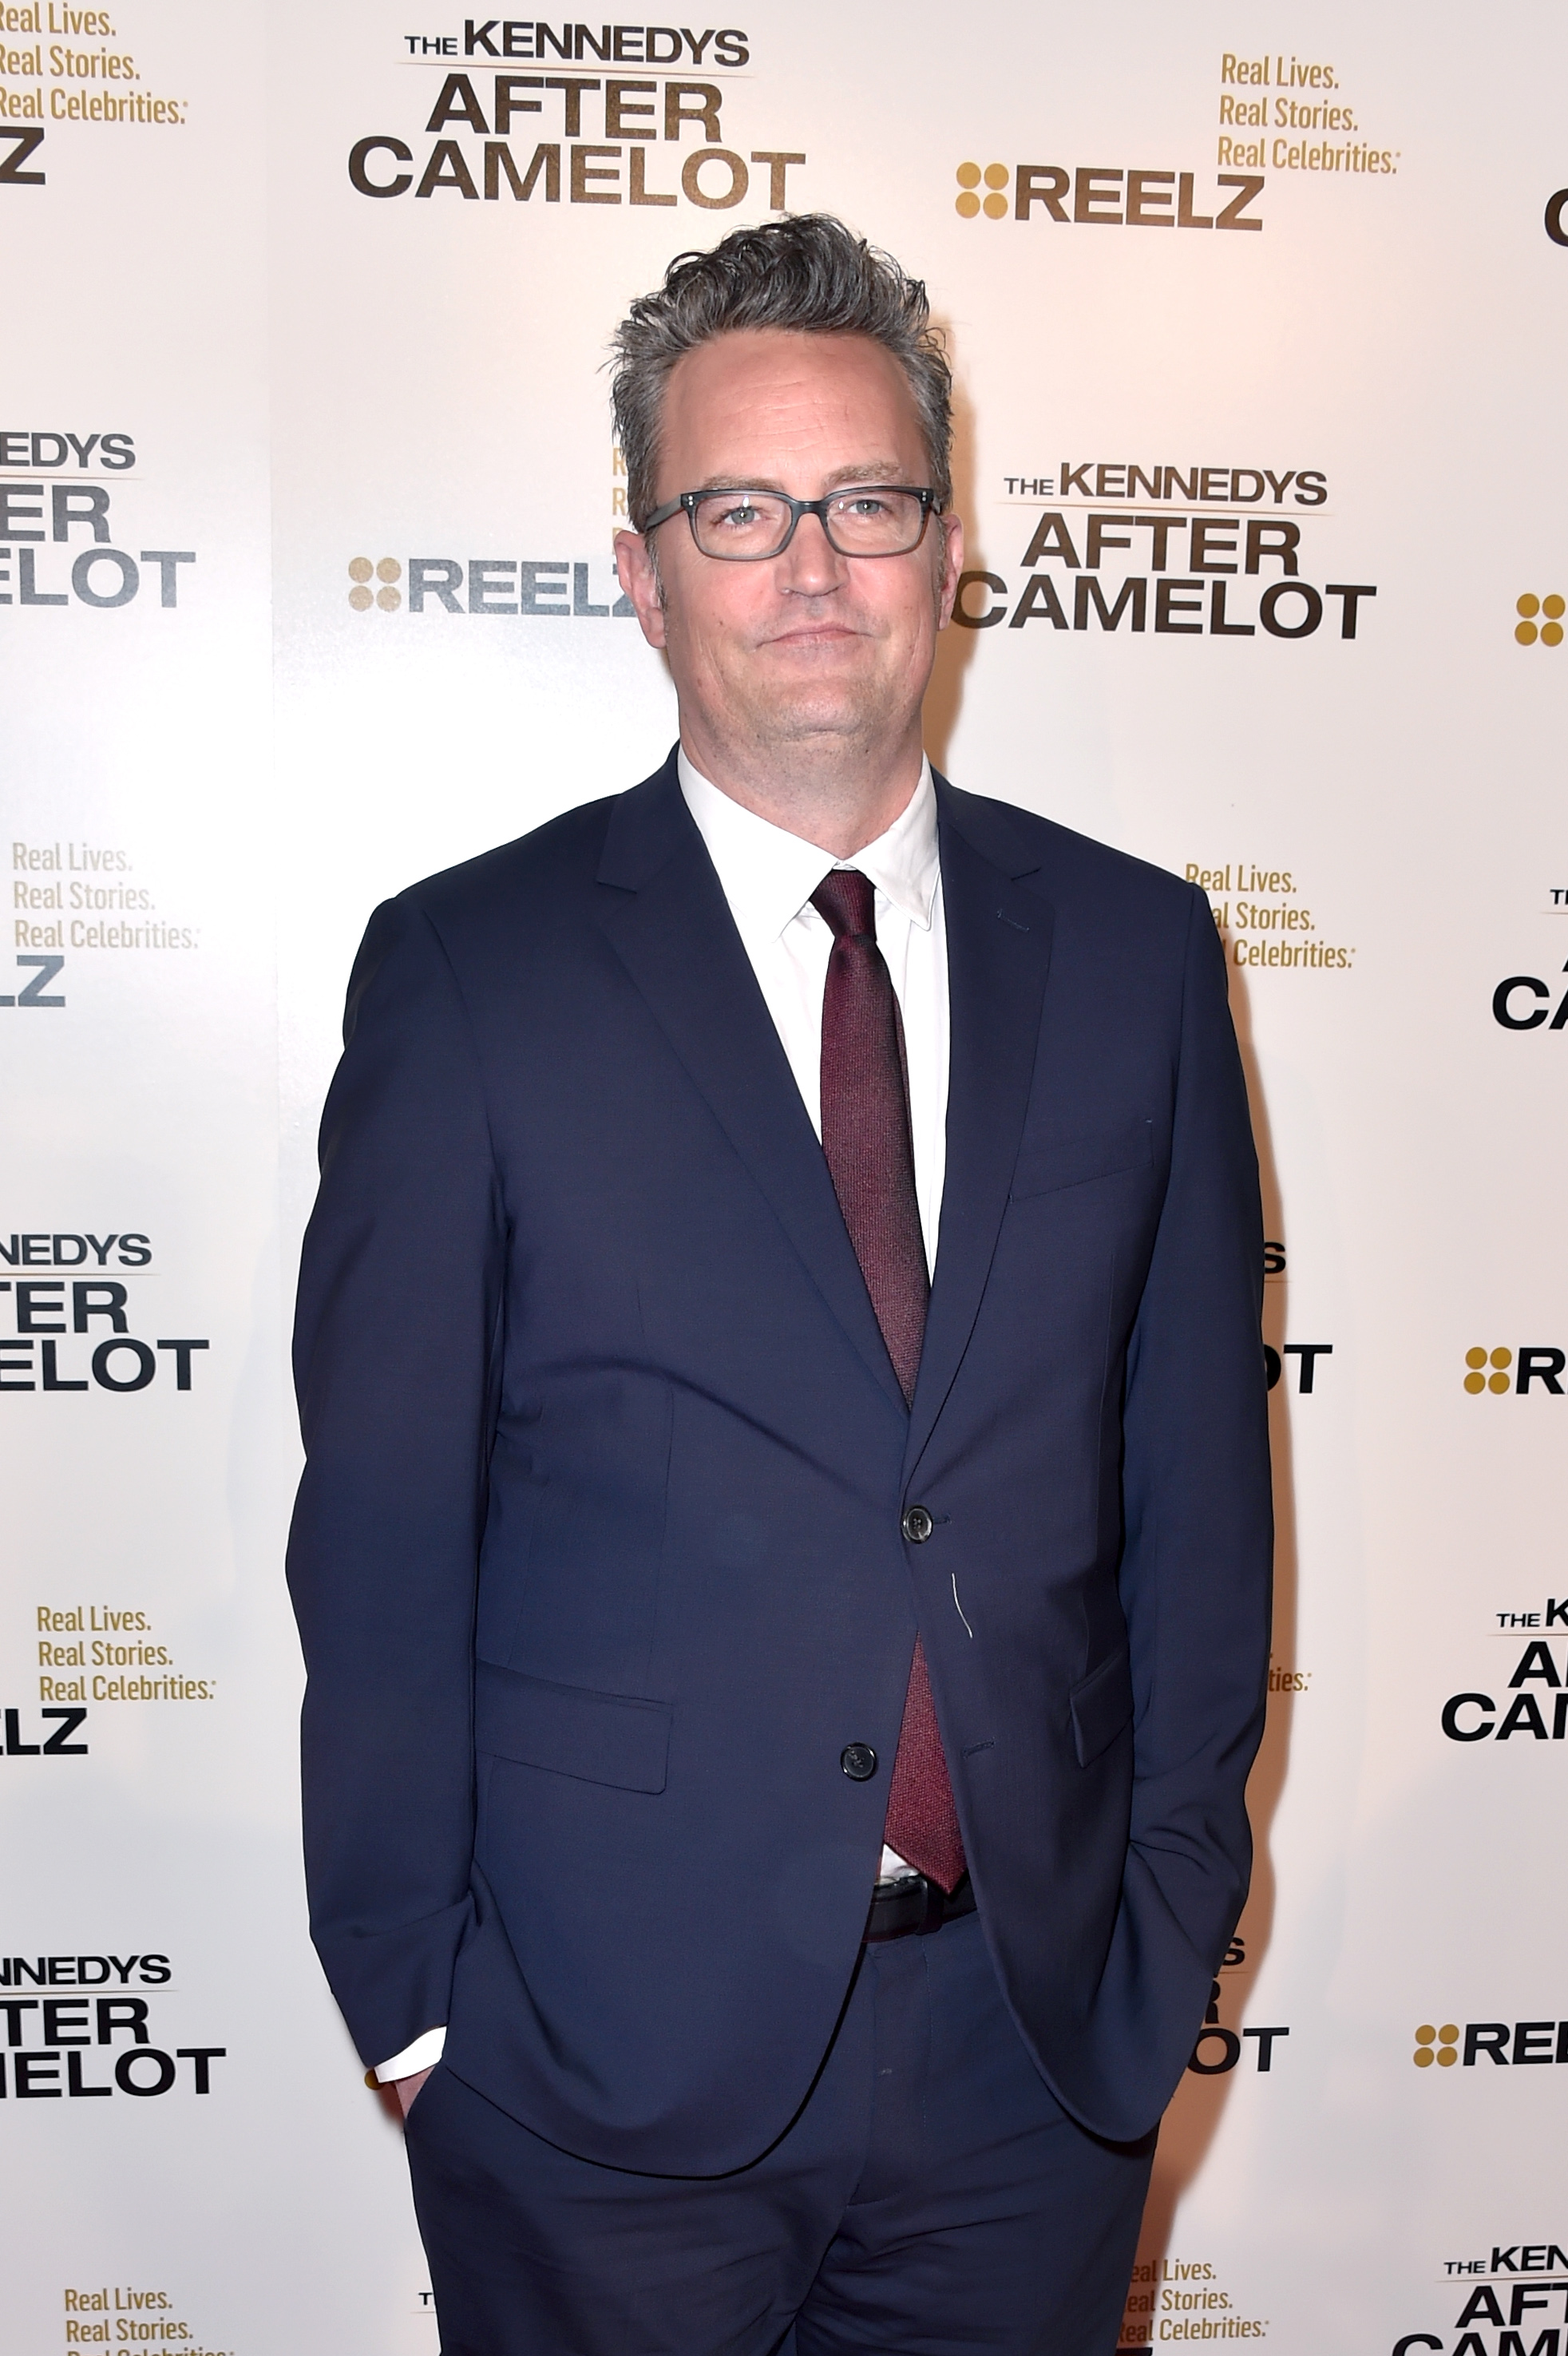 Matthew Perry at the premiere of Reelz's "The Kennedys After Camelot" in Beverly Hills, California on March 15, 2017. | Source: Getty Images